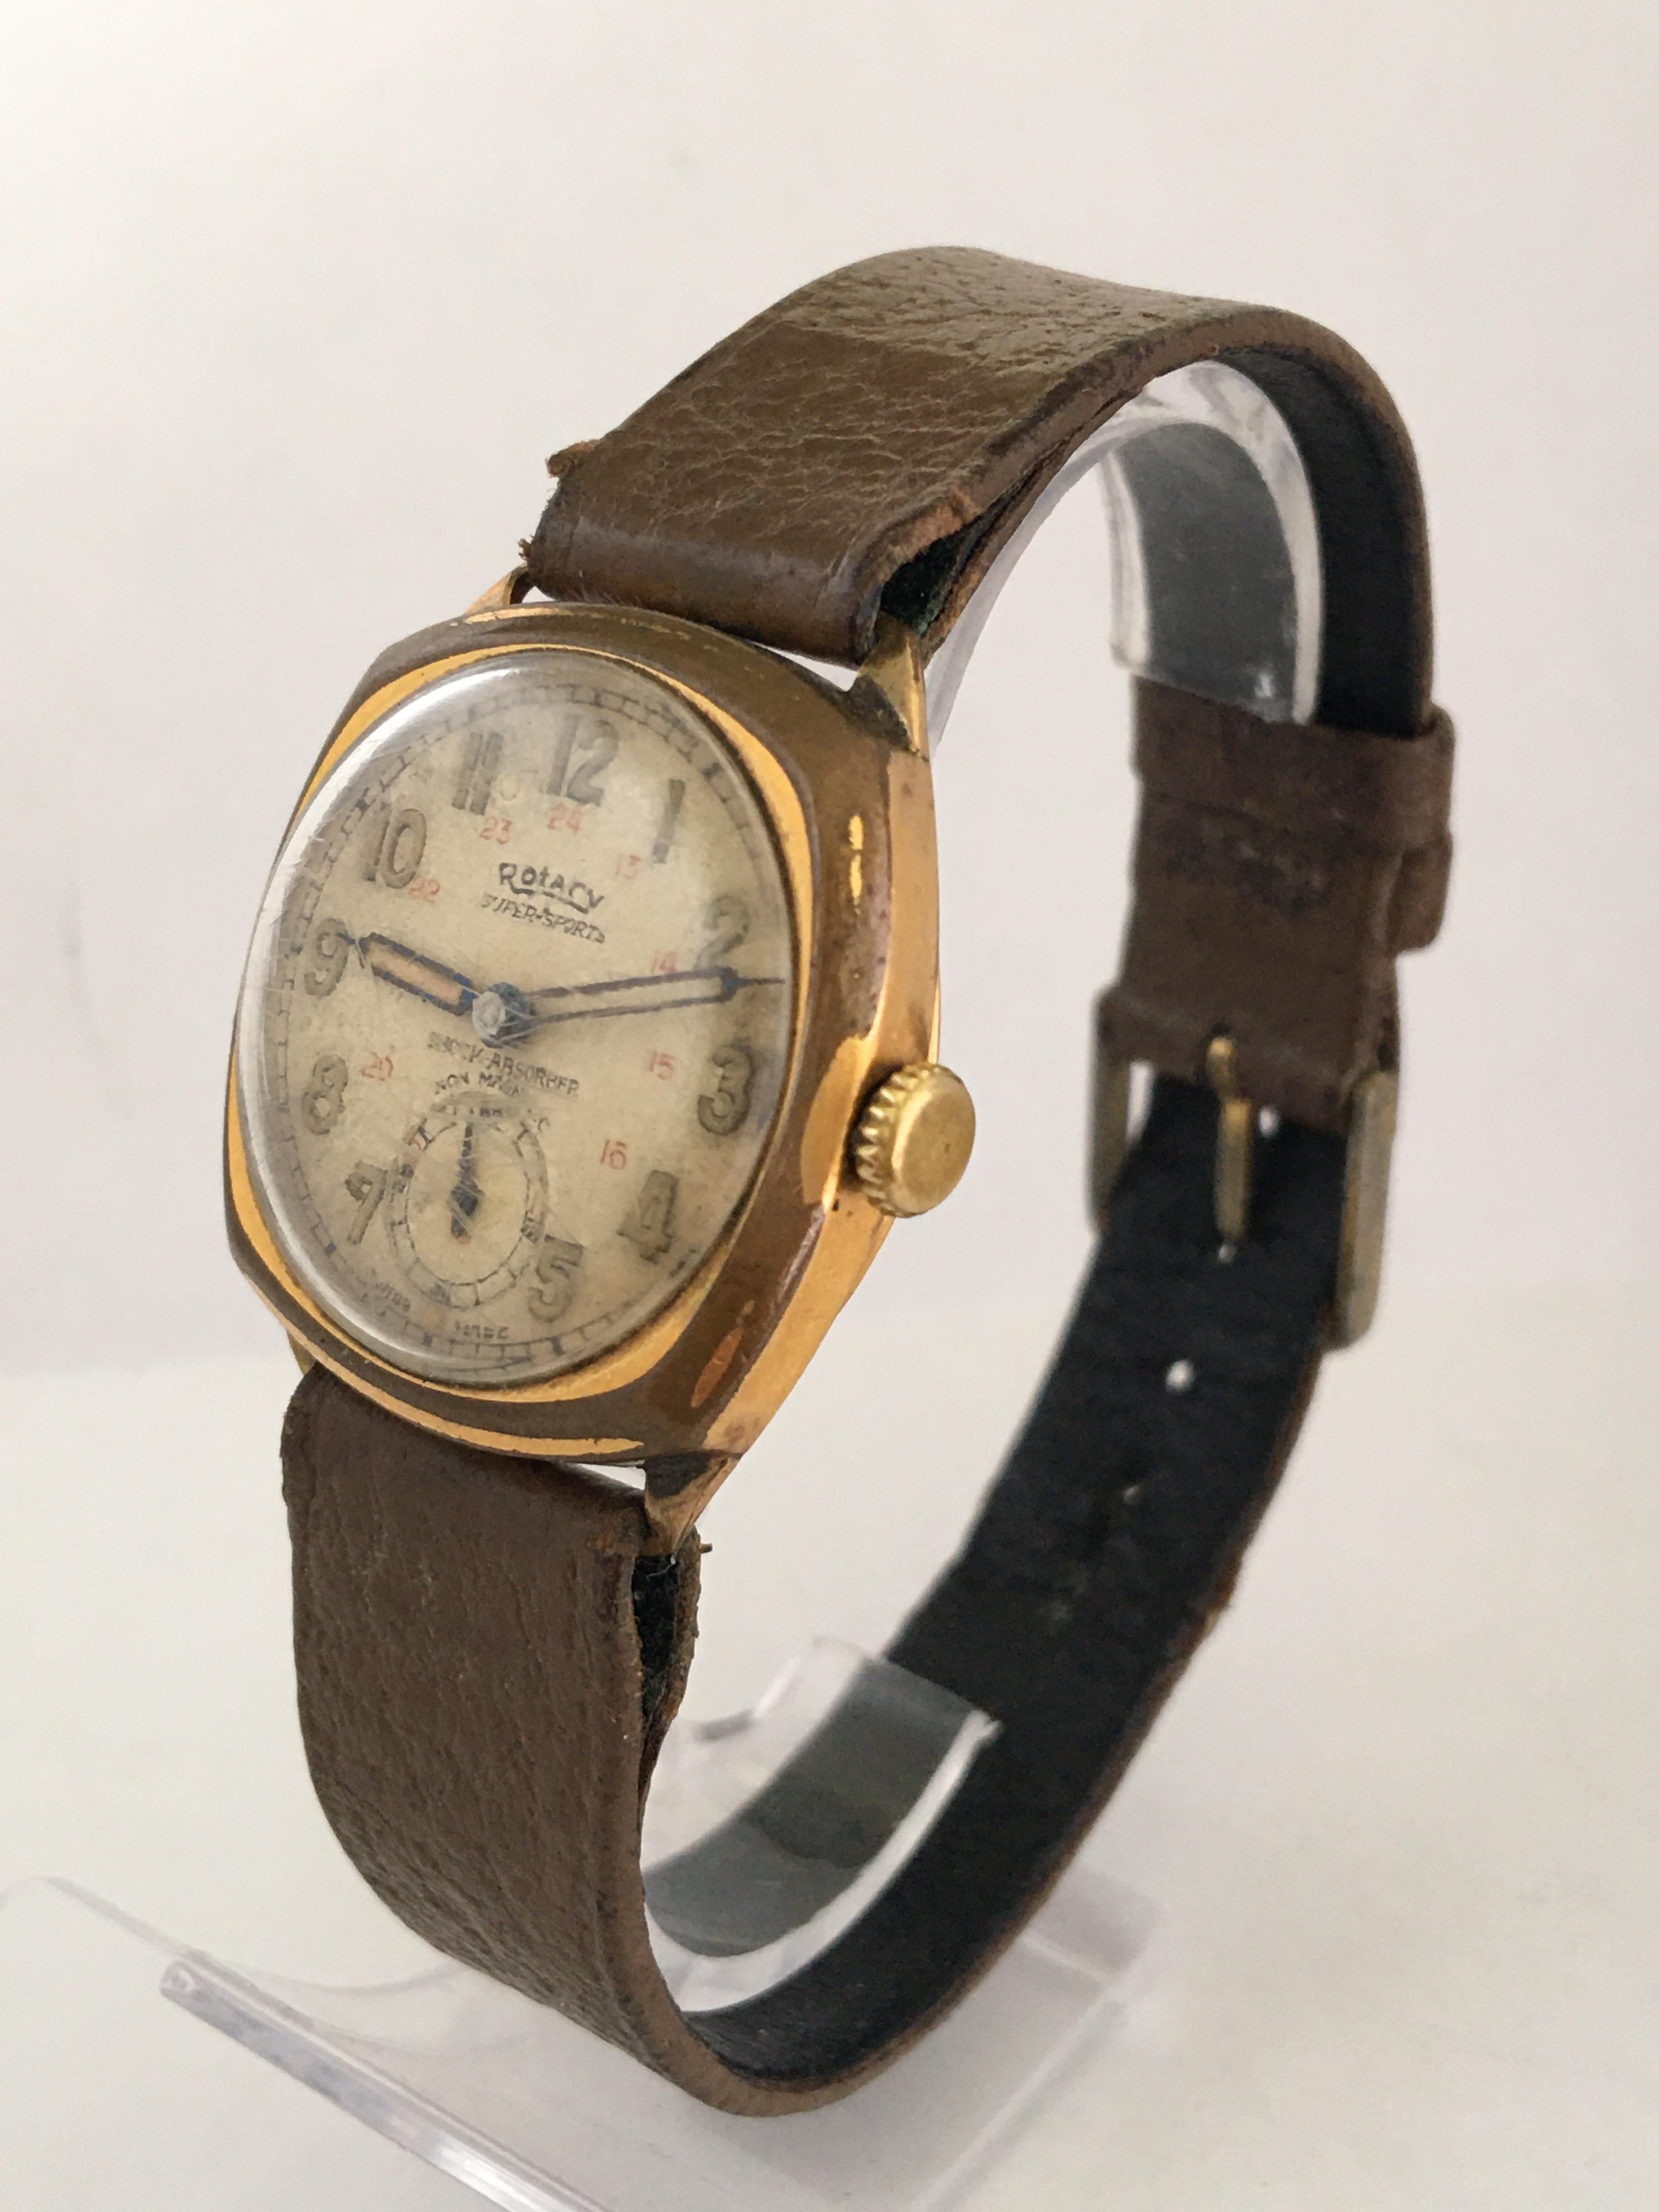 This pre-owned vintage watch is working and ticking well. Visible wear and tear on the watch gold plated case as shown. Watch case tarnished and a tear on the back cover as show.

Please study the images carefully as form part of the description.